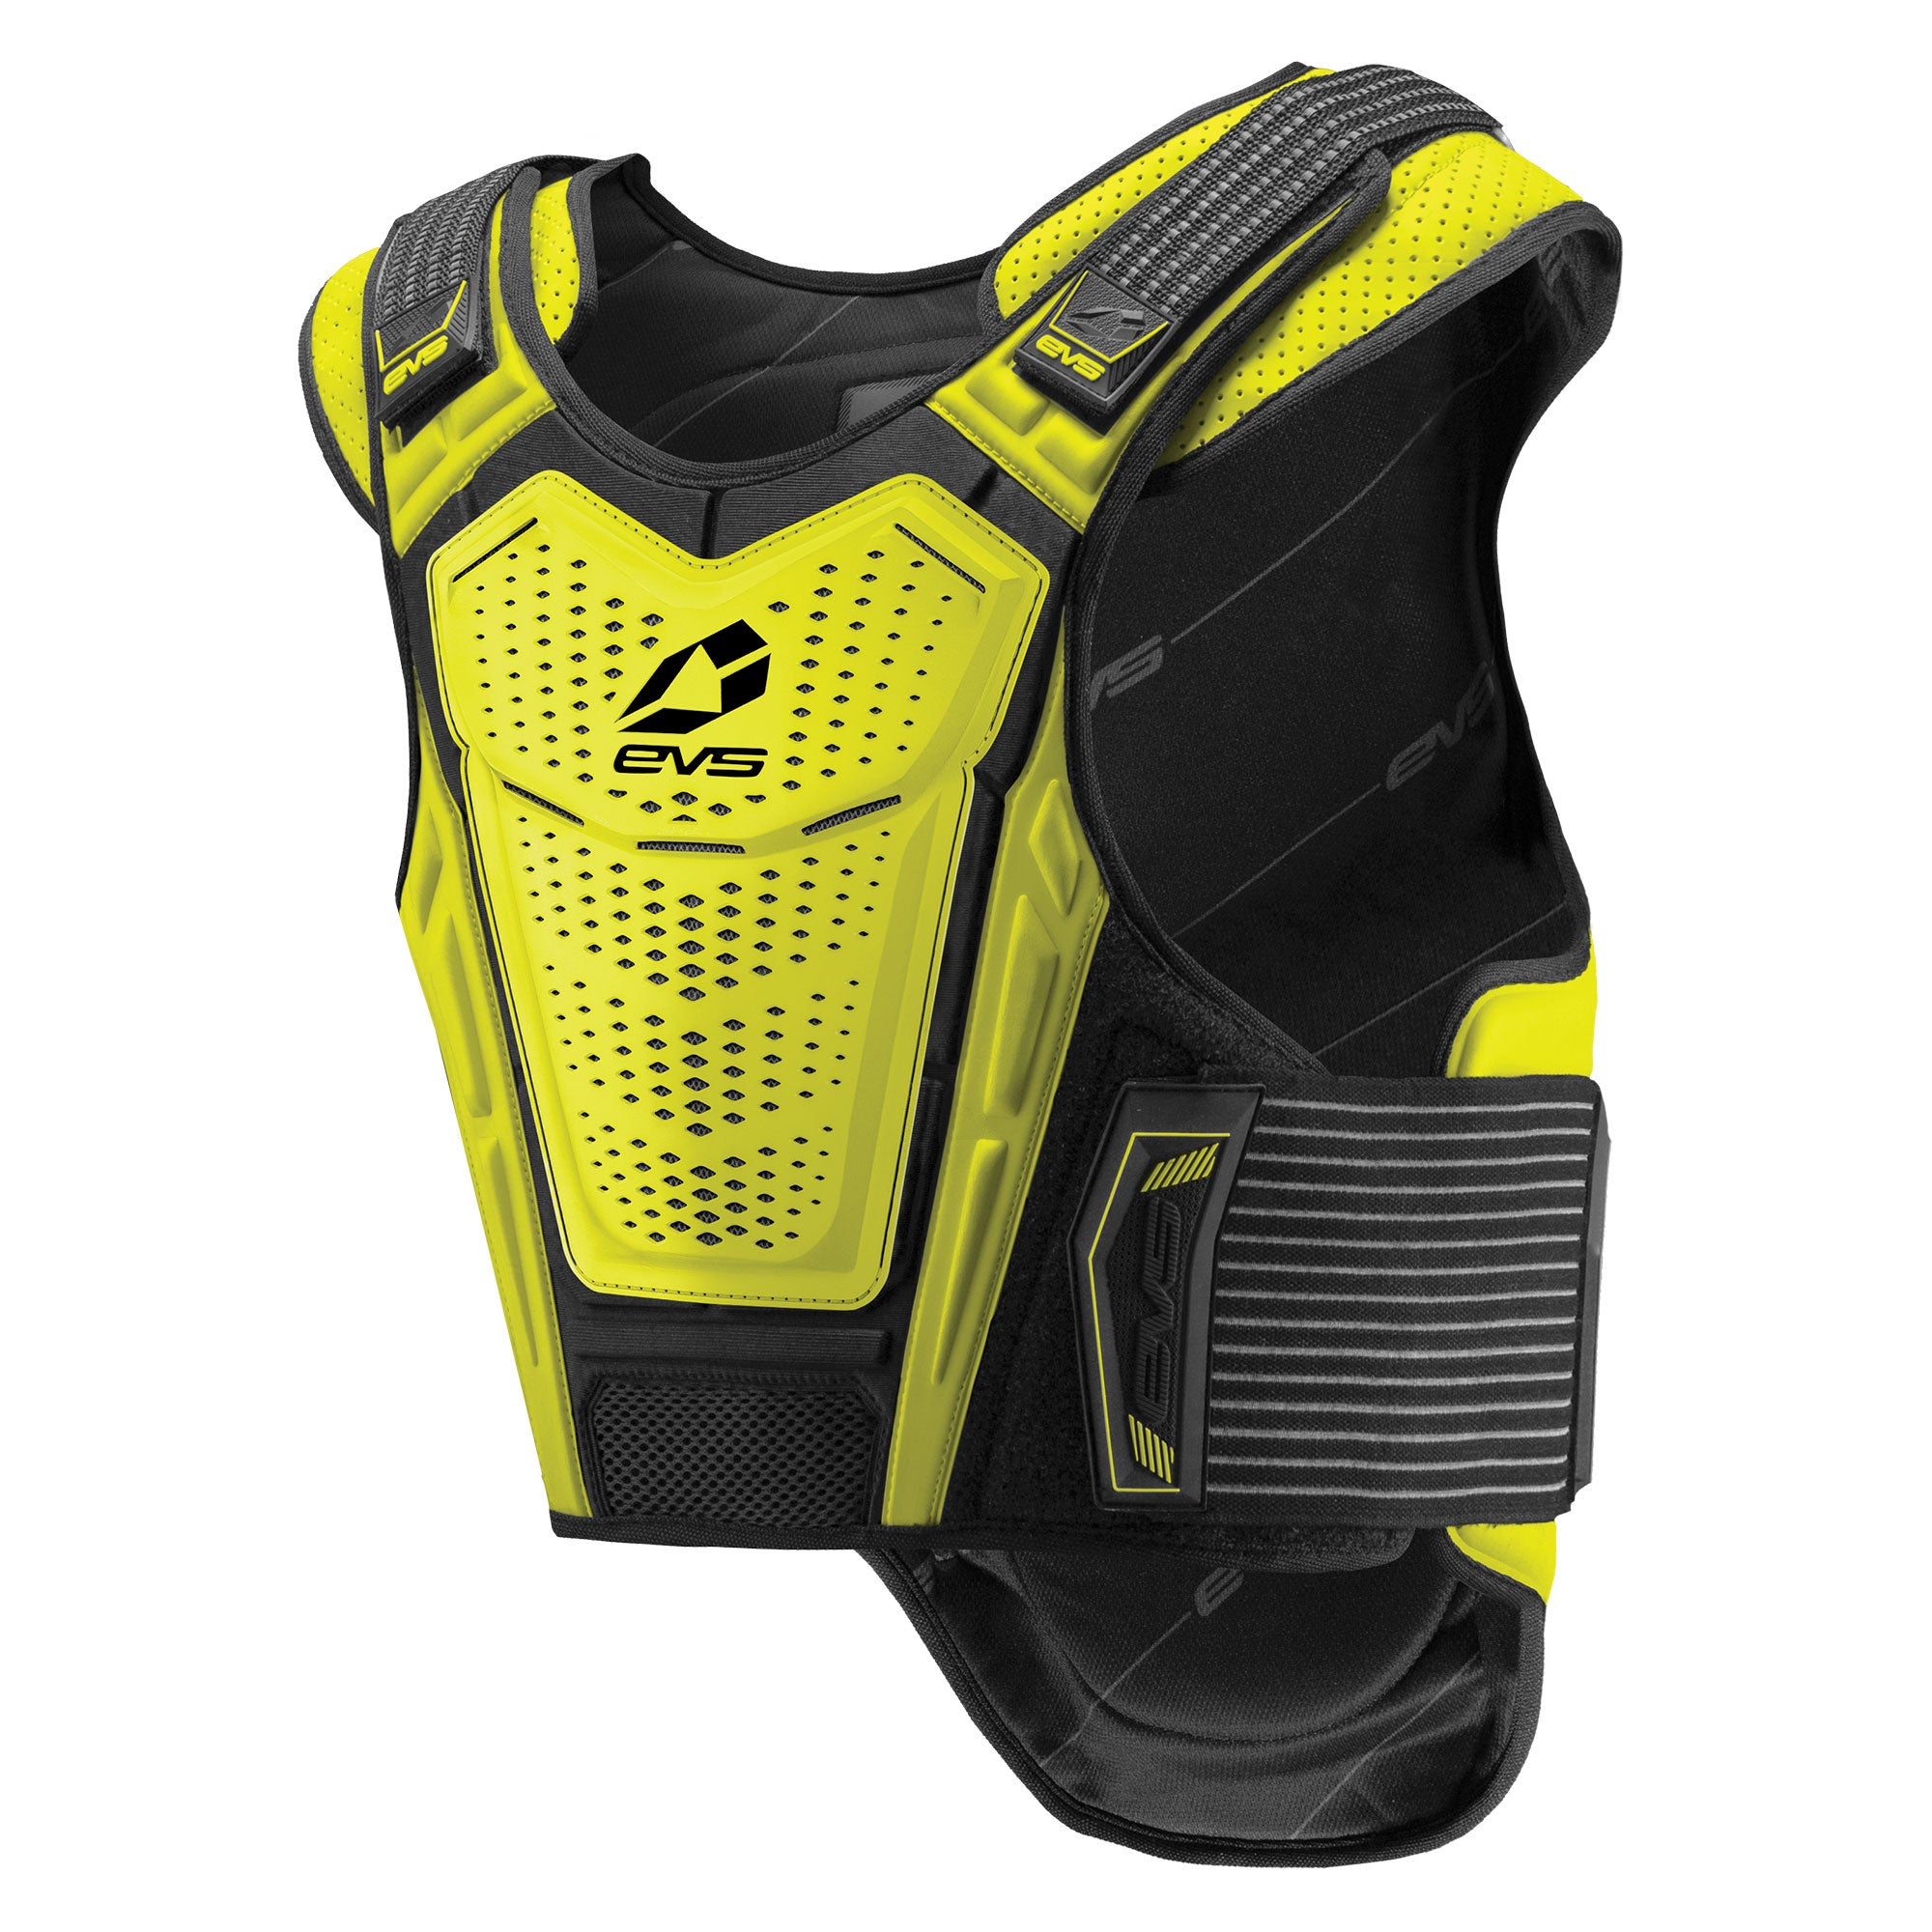 Sport Armour  Protective Apparel and Gear for Sports